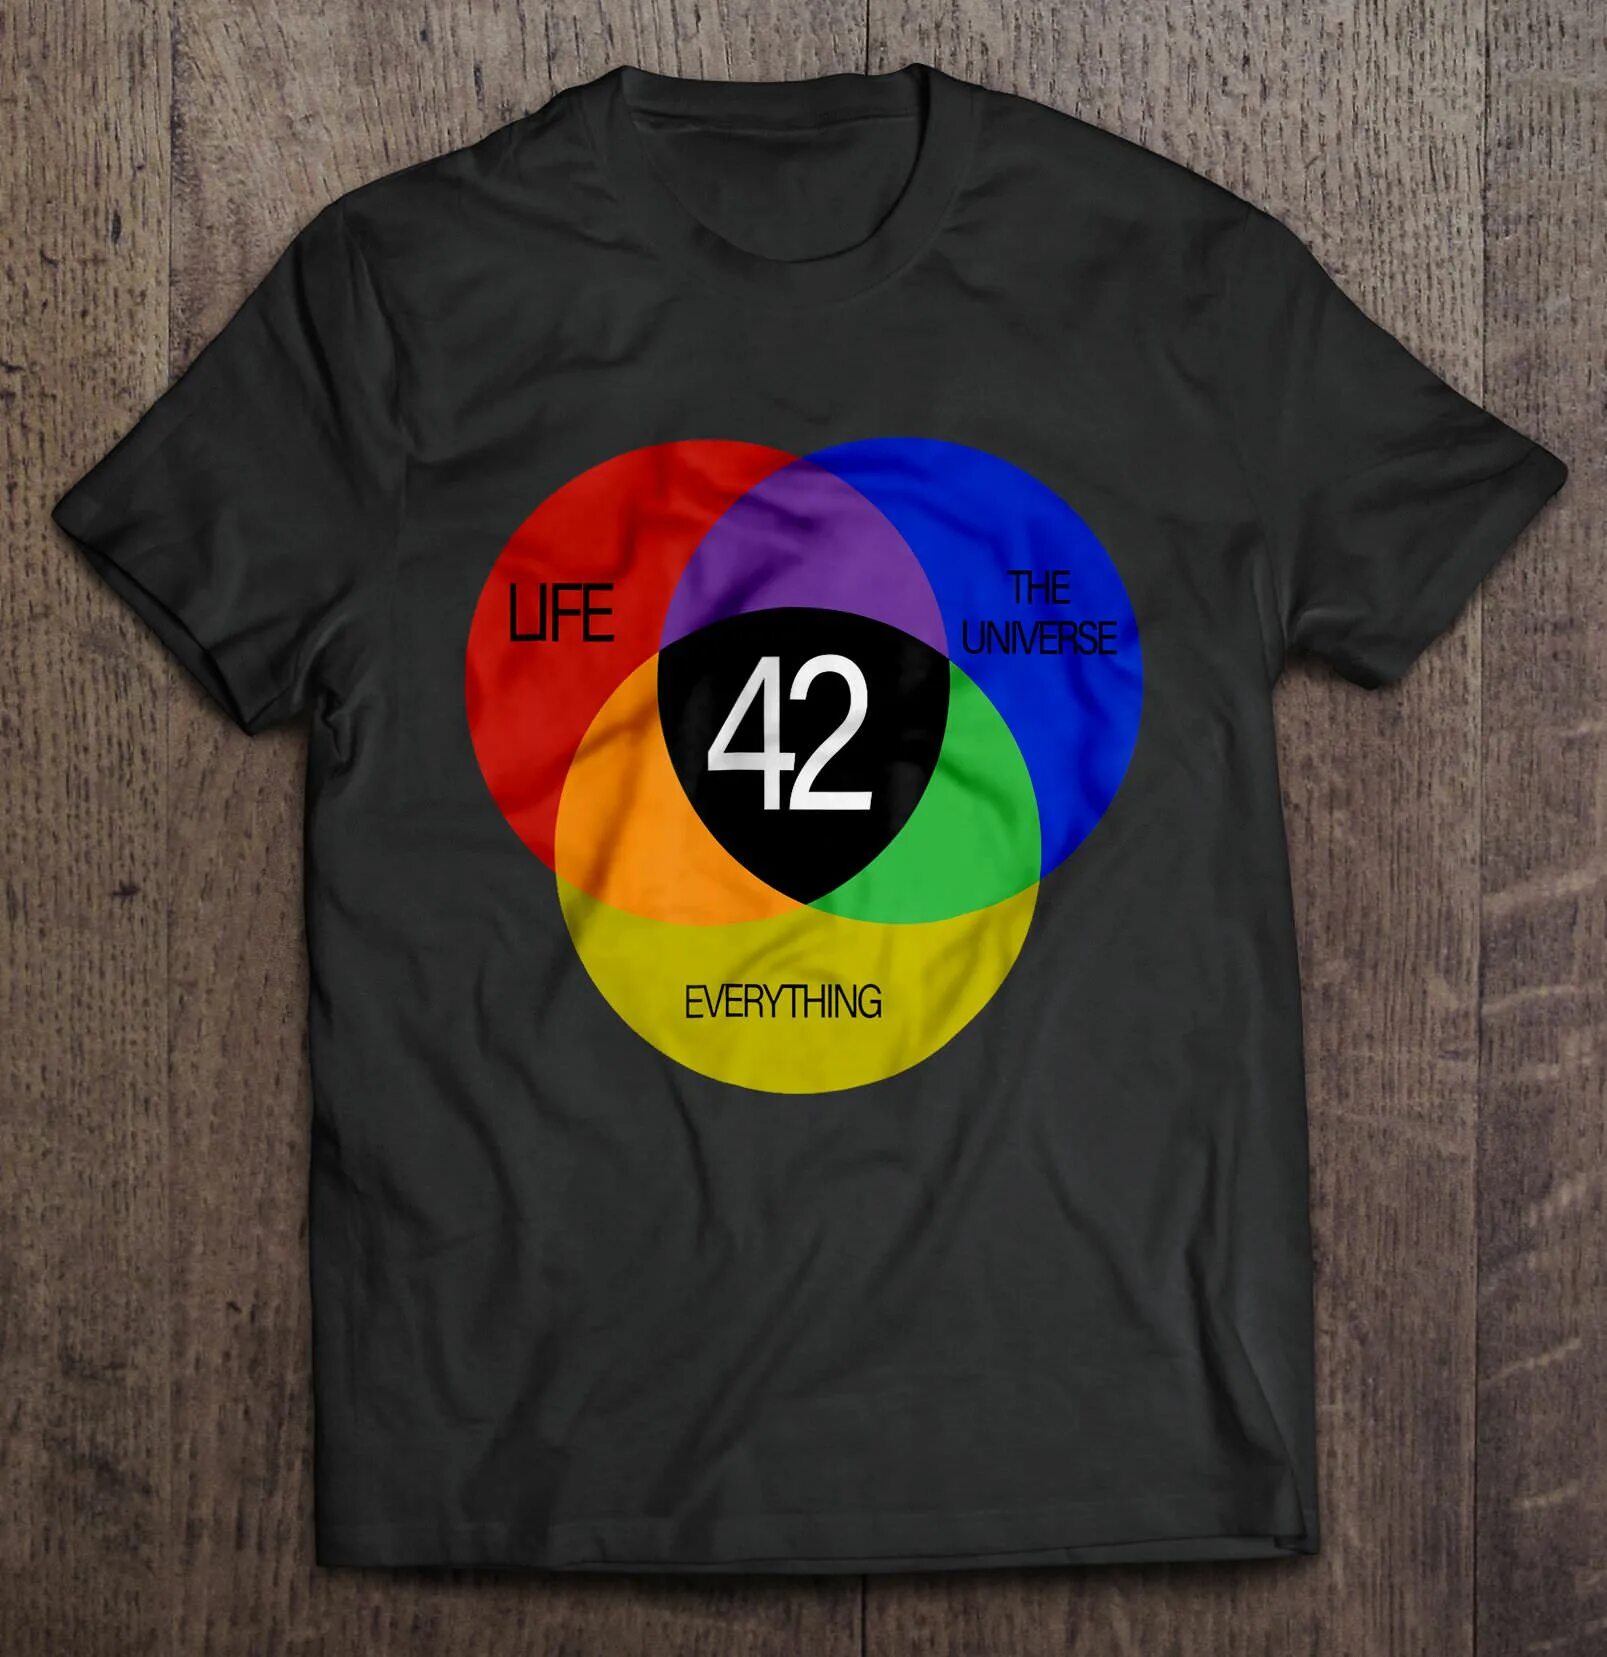 42 The answer to Life the Universe and everything футболка. The answer to Life the Universe and everything. Футболка автостопом по Вселенной. 42 Life Universe and everything.